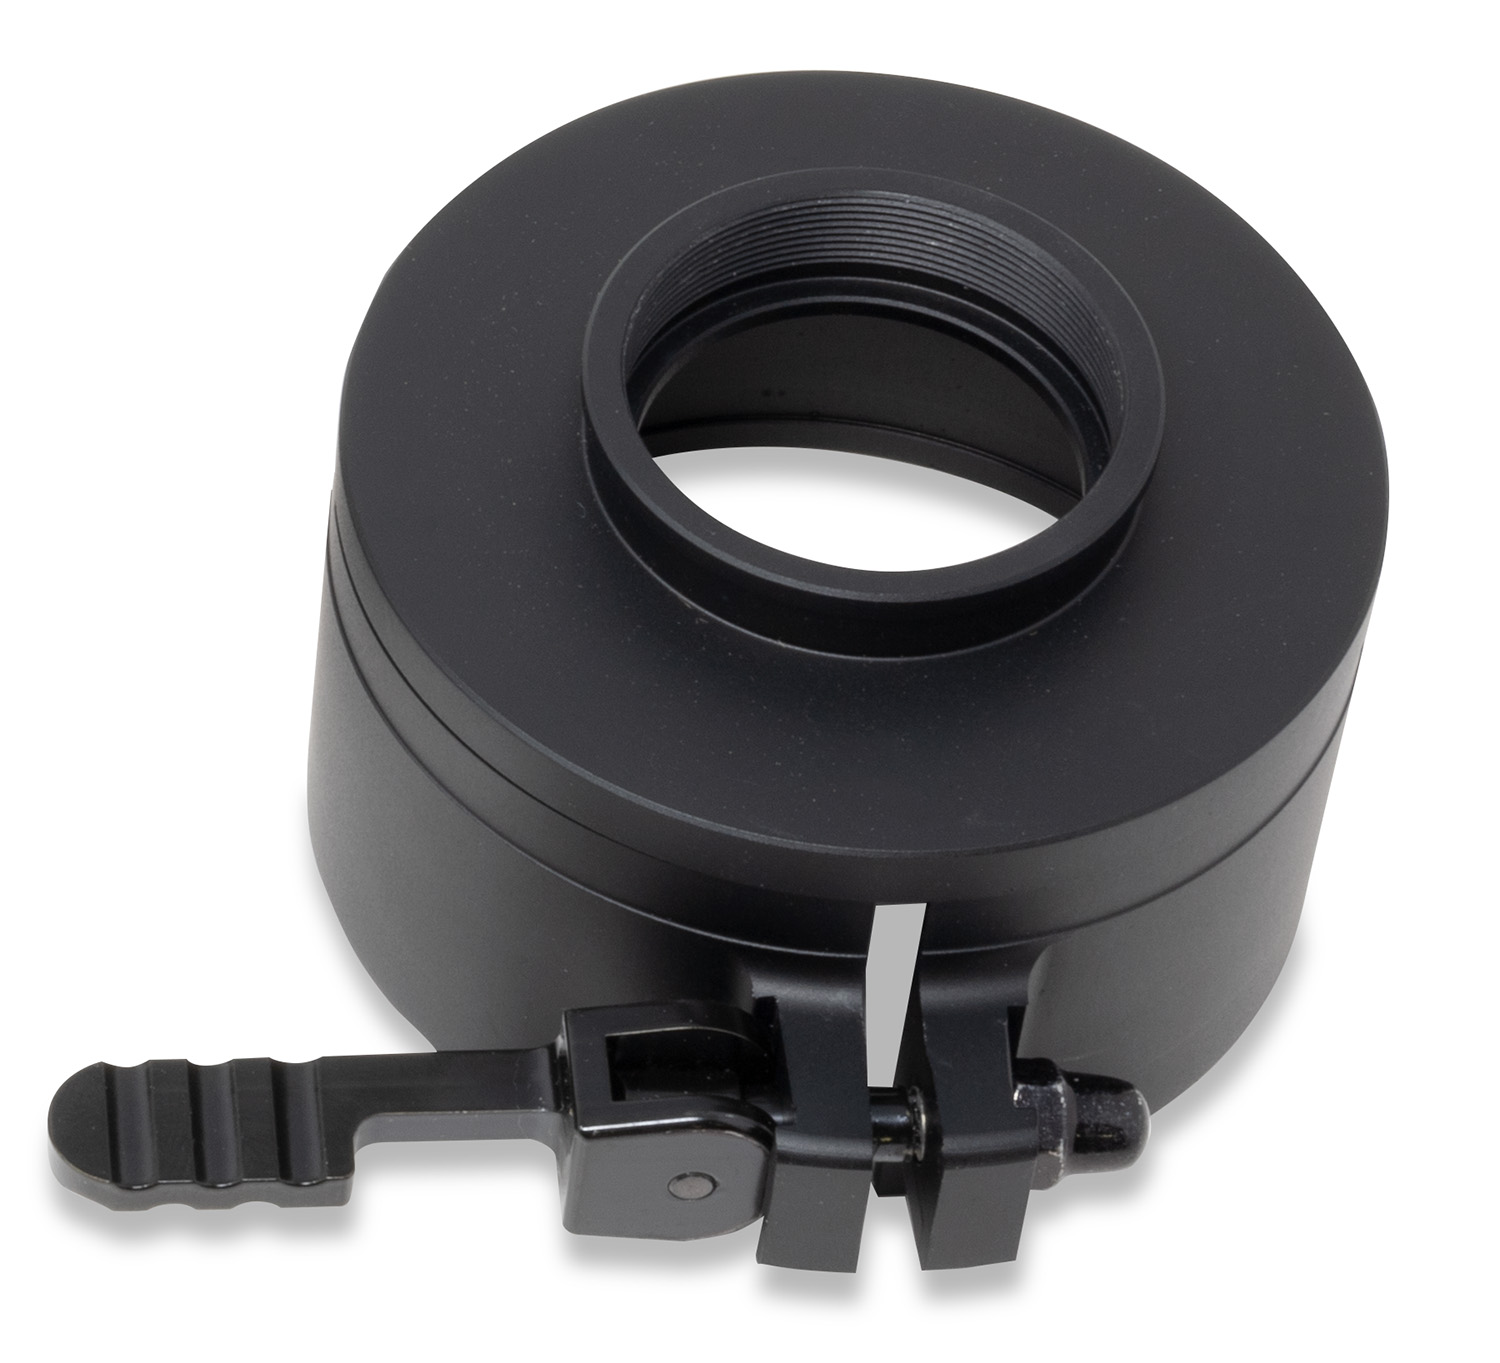 Burris 626603 BTC Adapter 56-64mm Objective For Thermal Clip-On Black